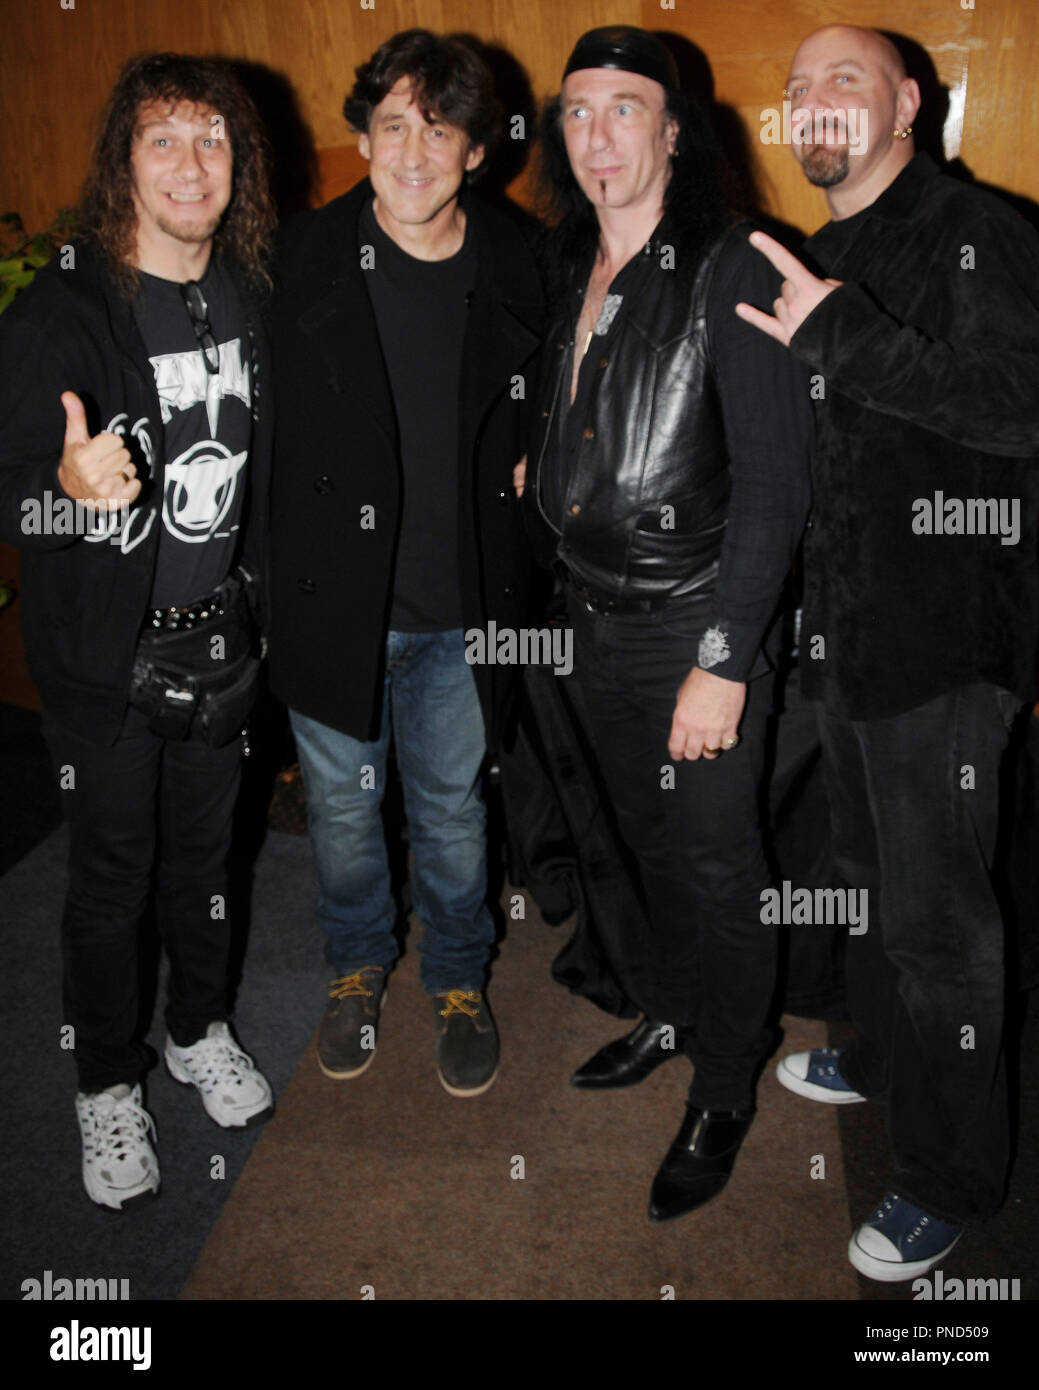 Cameron Crowe (second from left) with Anvilduring the reception of the DVD release of 'Anvil The Story of Anvil' held at the WGA in Beverly Hills, CA on Thursday, October 8, 2009. Photo by Richard Soria/ PRPP /PictureLux File Reference # CameronCroweAnvil02 10809PRPP  For Editorial Use Only -  All Rights Reserved Stock Photo